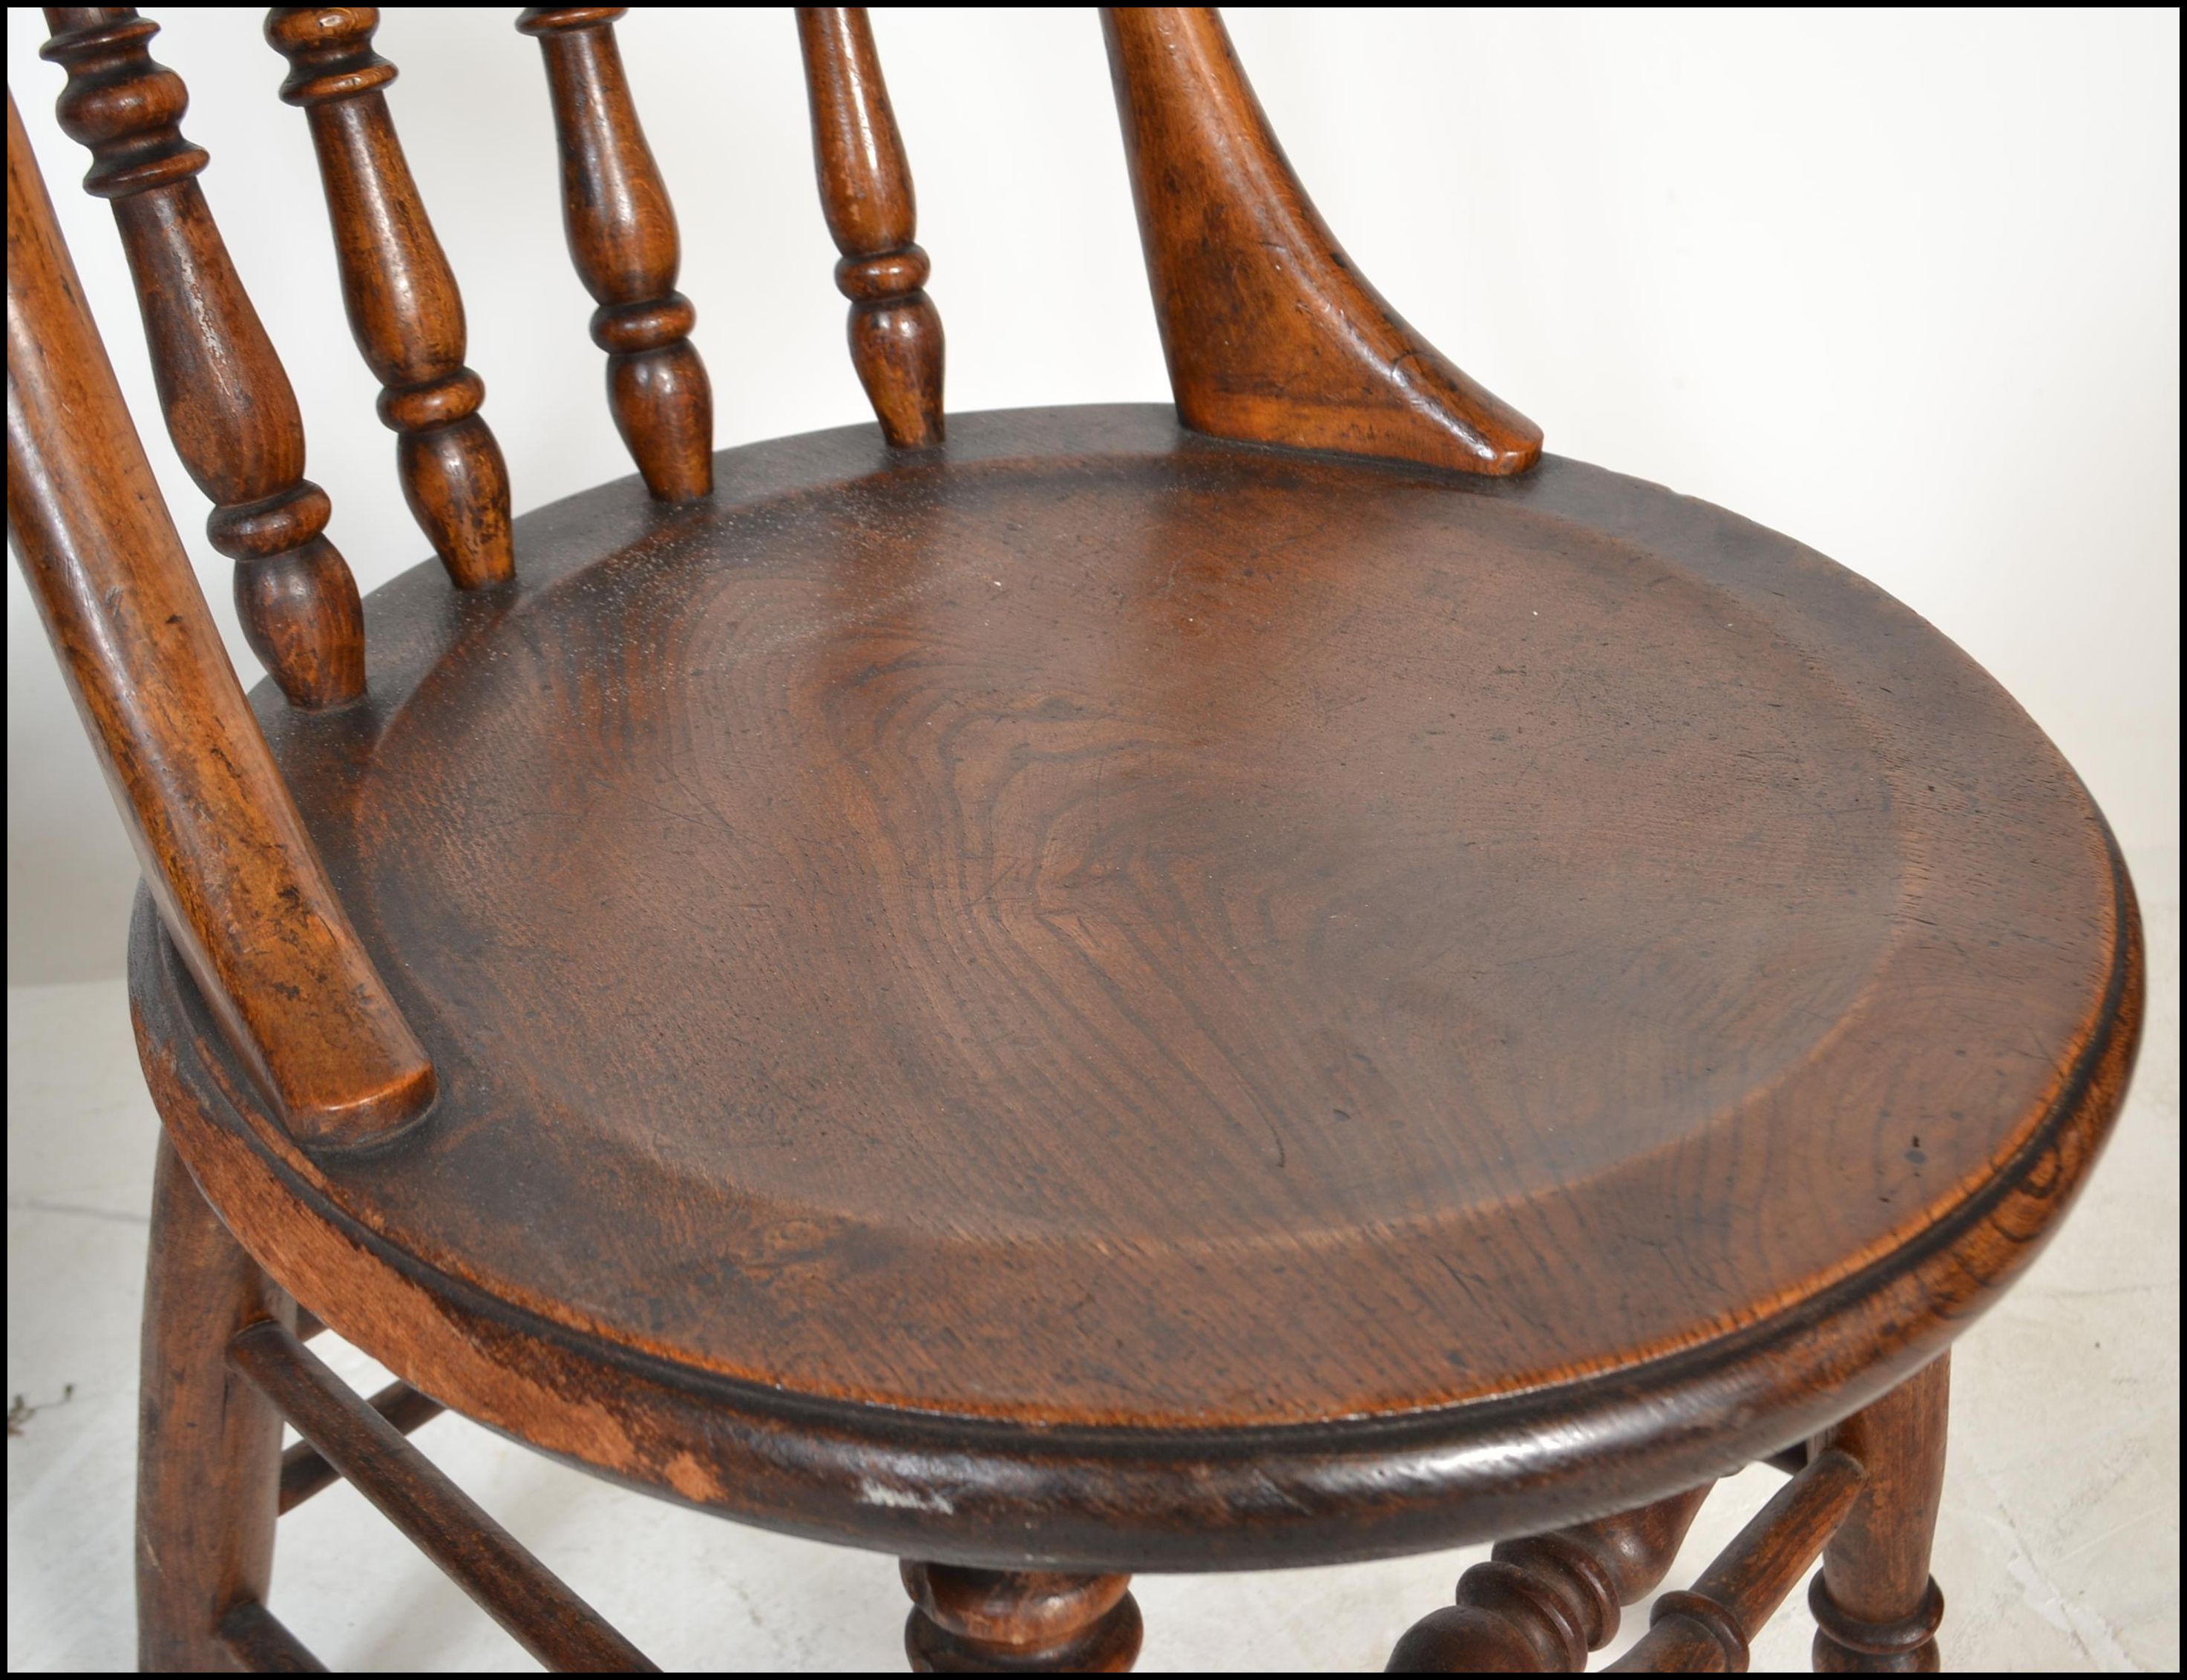 12 VICTORIAN 19TH CENTURY BEECH AND ELM WINDSOR DI - Image 5 of 6